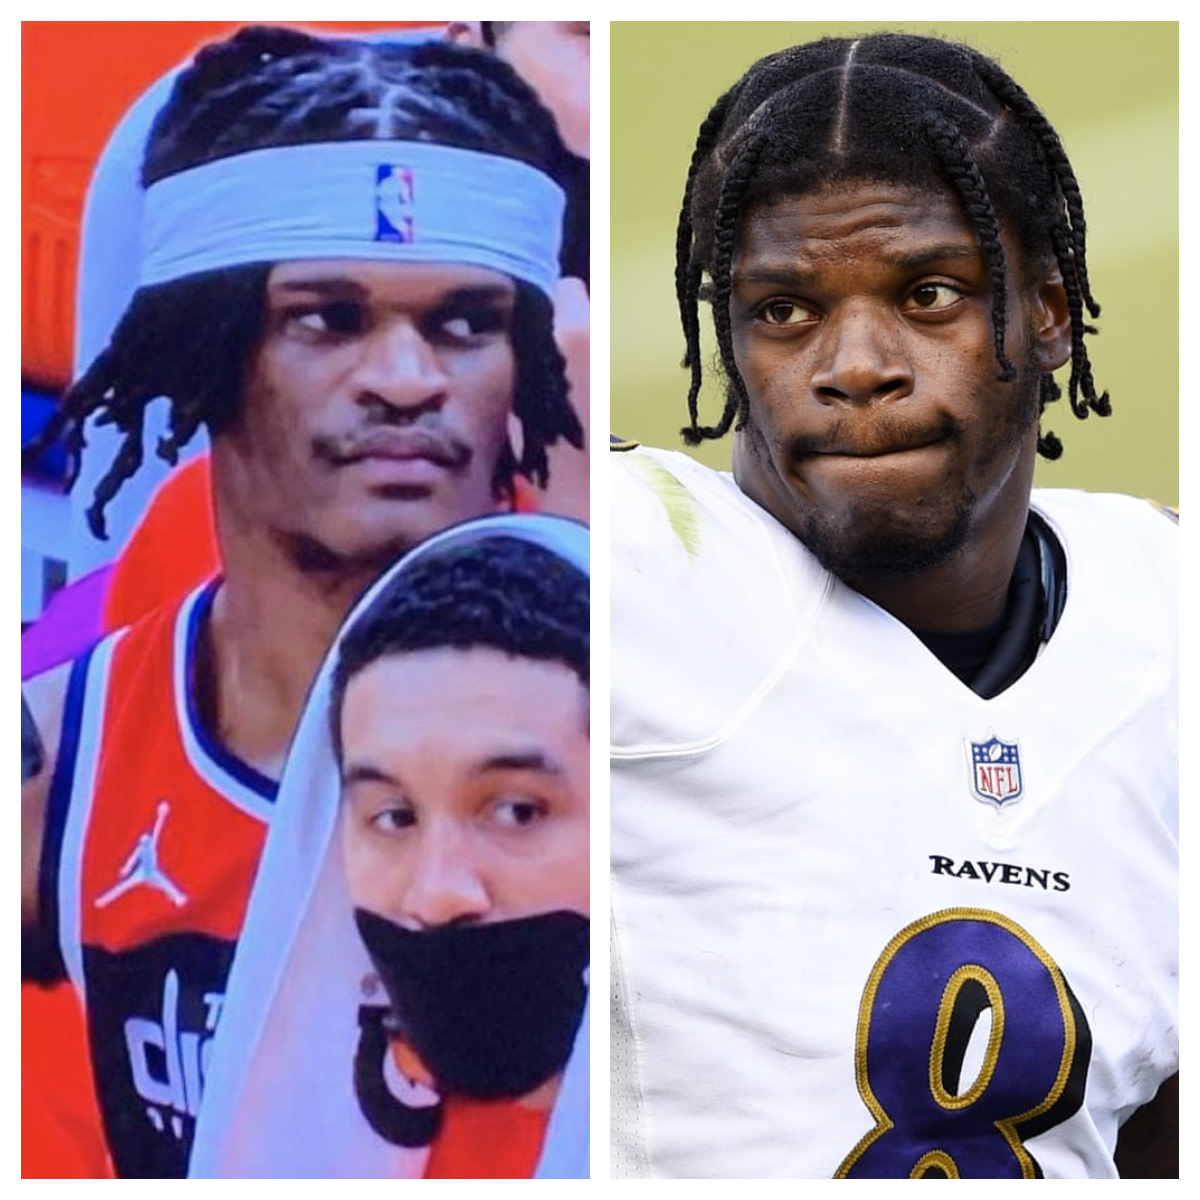 Wizards Player Alize Johnson Is Tired Of Jokes About Him Looking Like Ravens Quarterback Lamar Jackson: "Can I Live My Life, I Might Have To Go Bald"